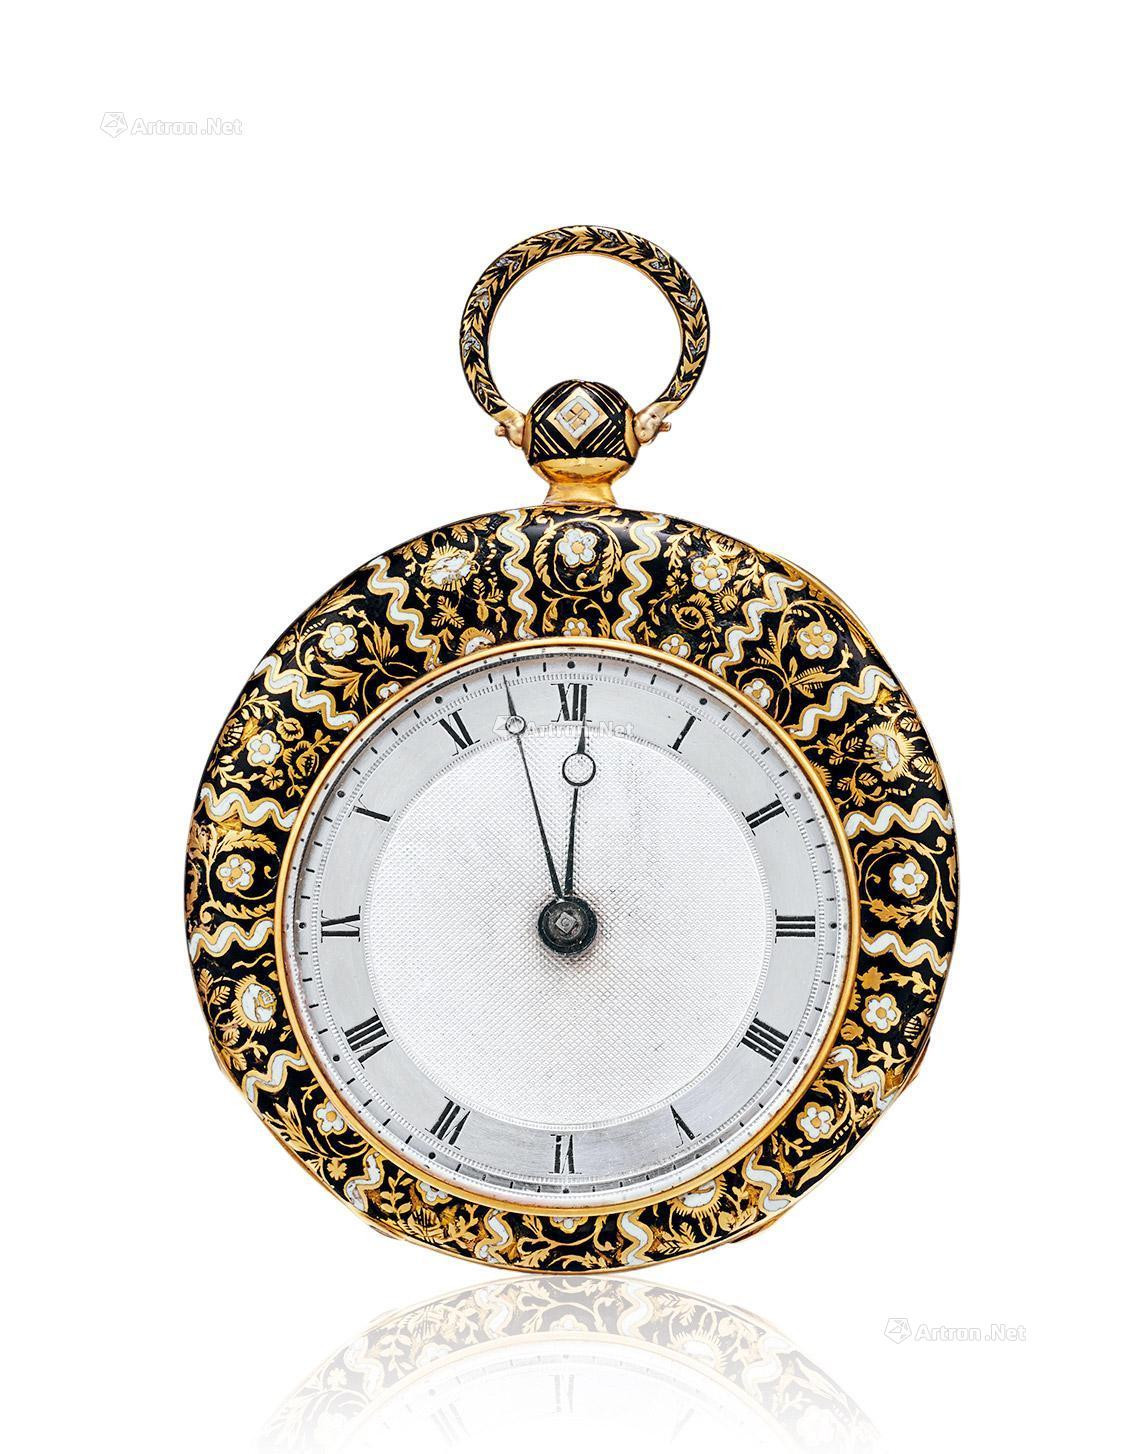 SWITZERLAND A YELLOW GOLD AND ENAMEL SET OPEN-FACED MANUALLY-WOUND POCKET WATCH